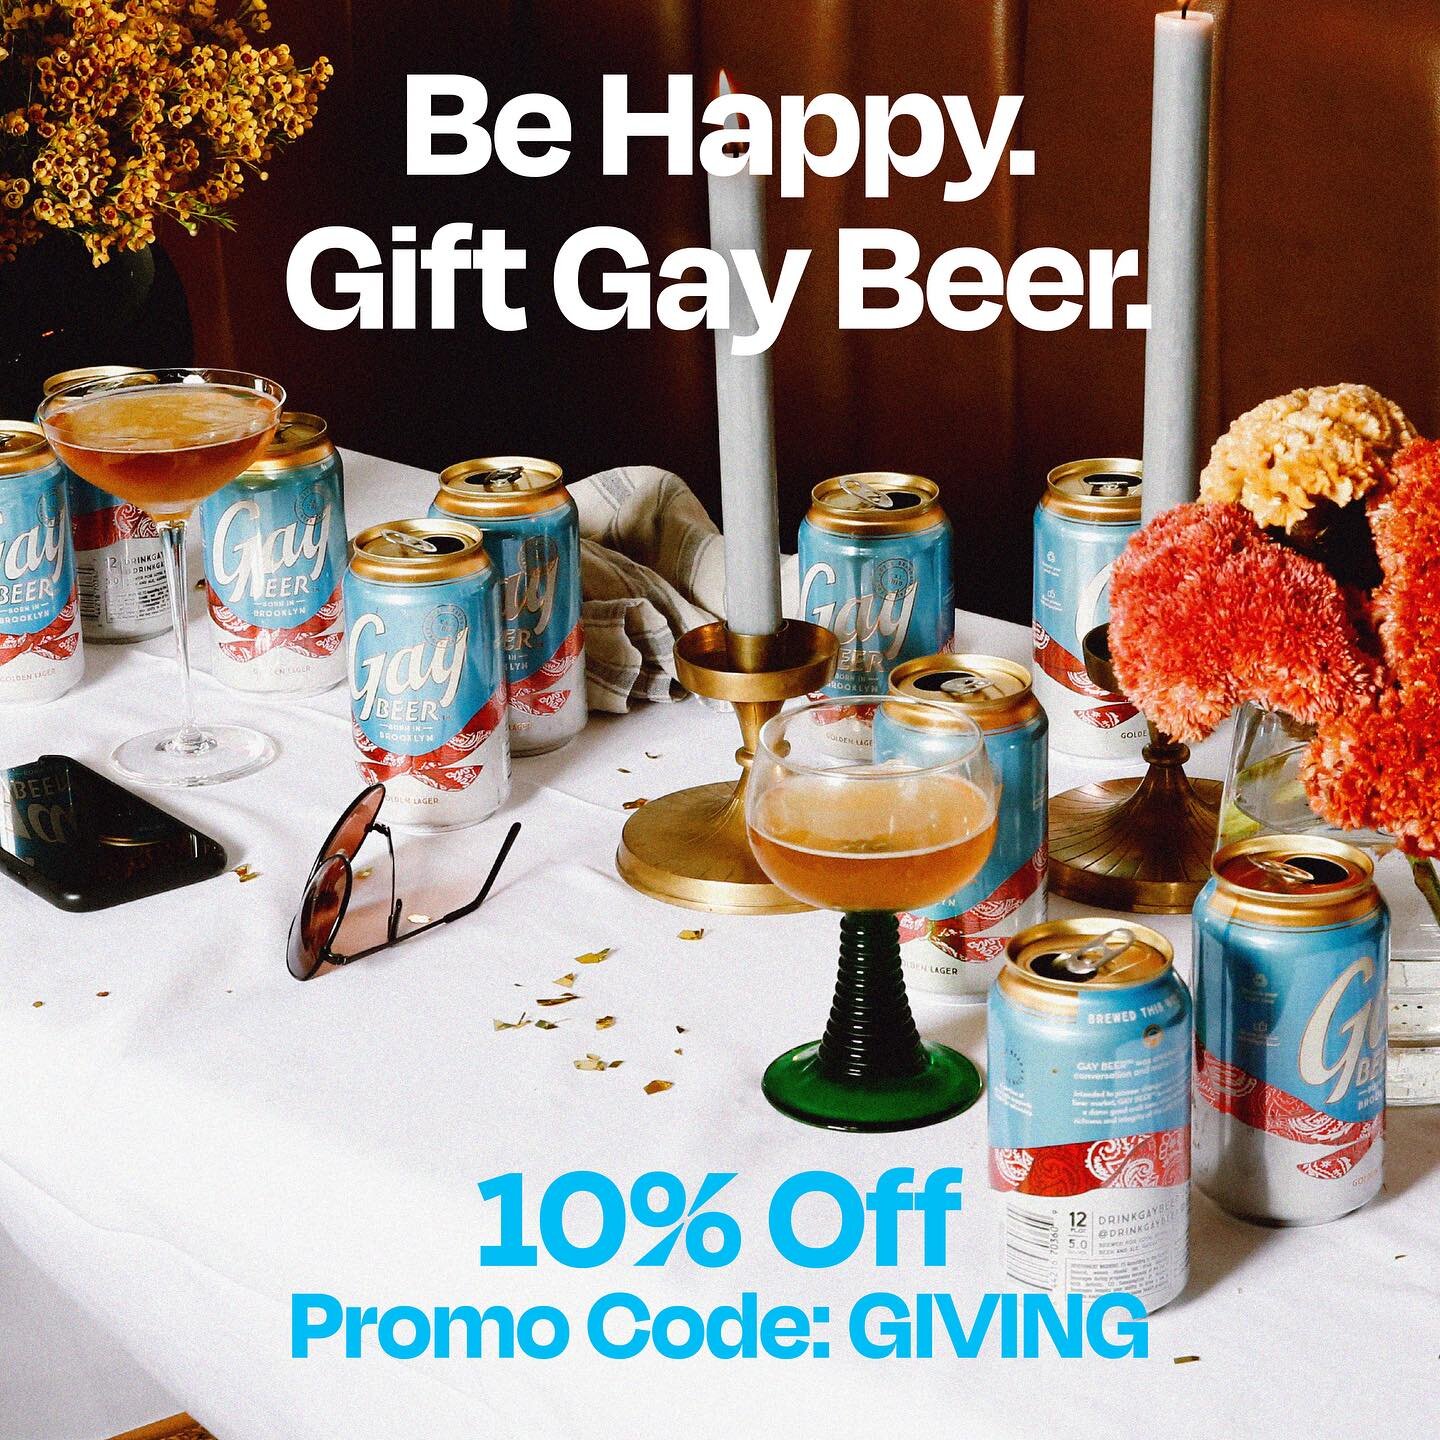 A gift from Gay Beer, receive 10% off your next order when using promo code: GIVING . Gay Beer is the perfect gift this season to stuff a stocking, give as a party favor or set under a tree. Click the link in bio to order now! // #gaybeer #gift #holi